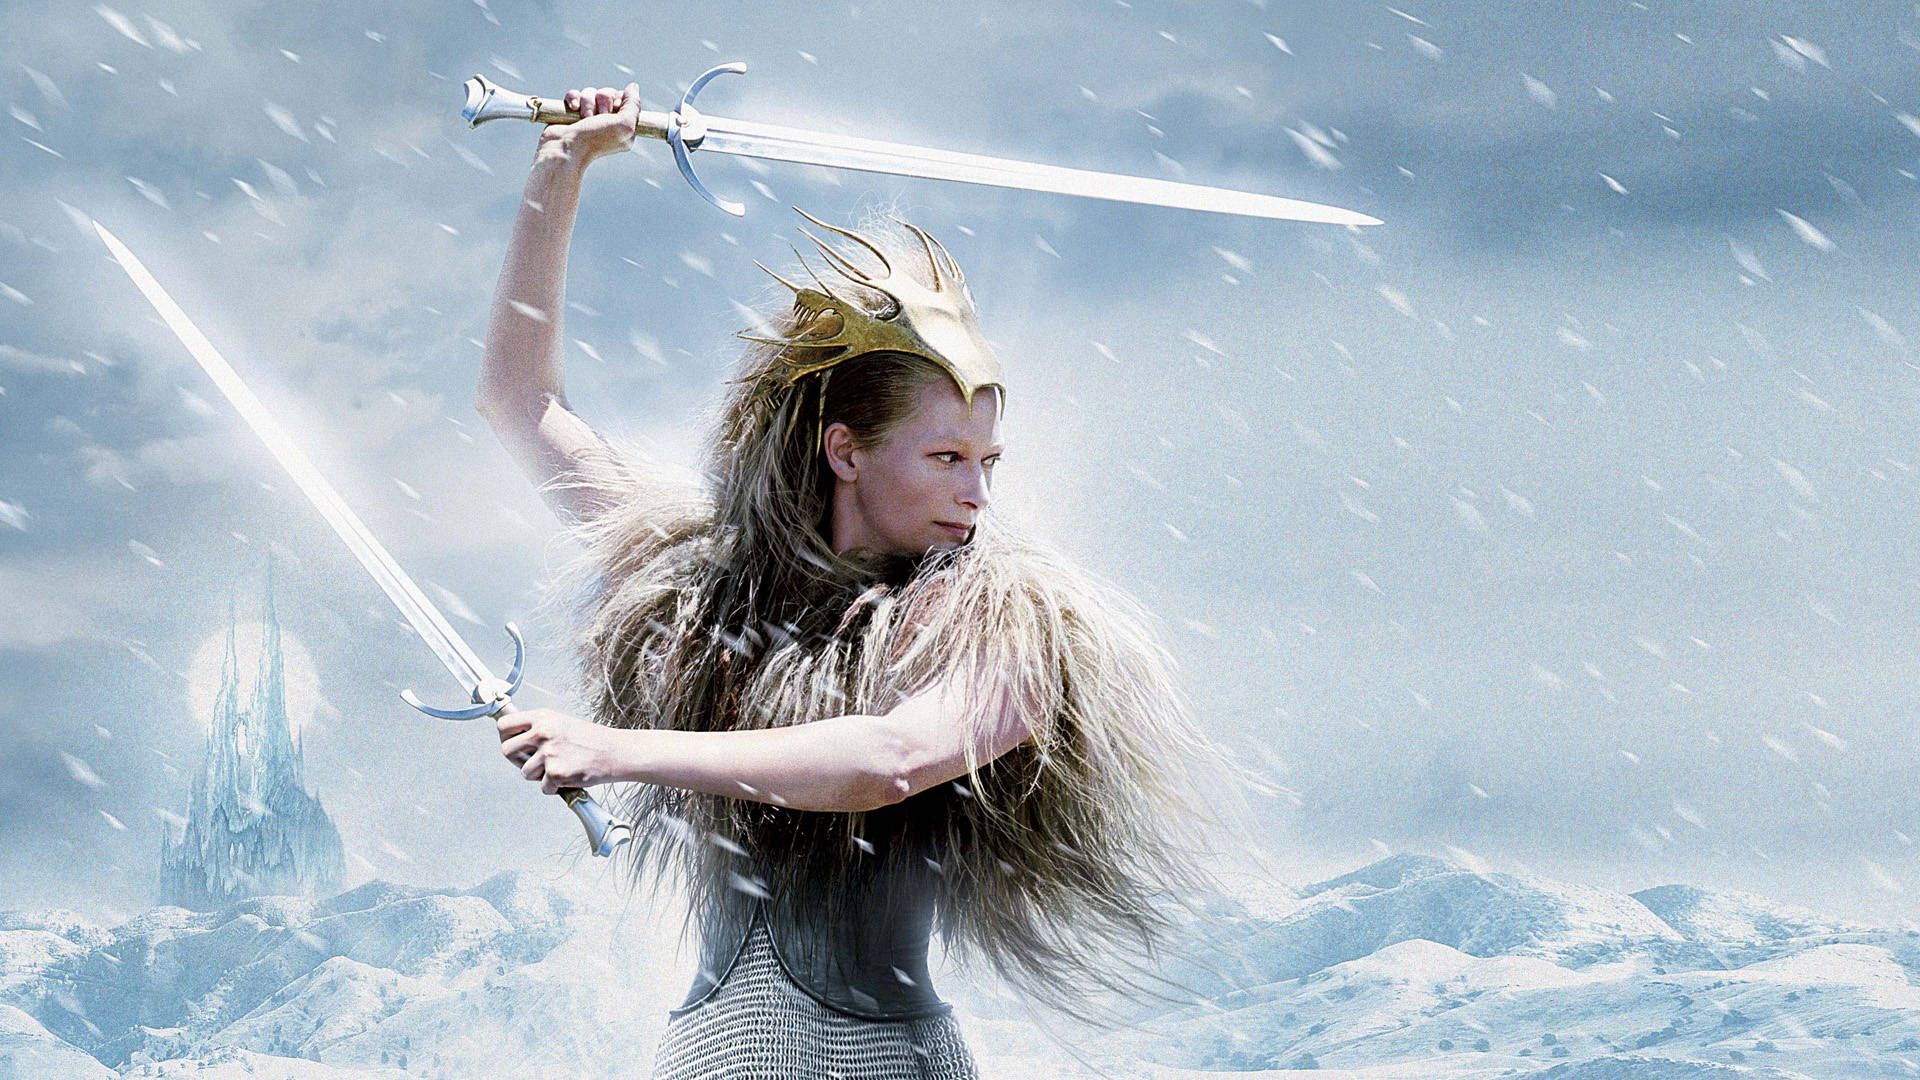 Tilda Swinton as the White Witch in The Chronicles of Narnia Wallpaper